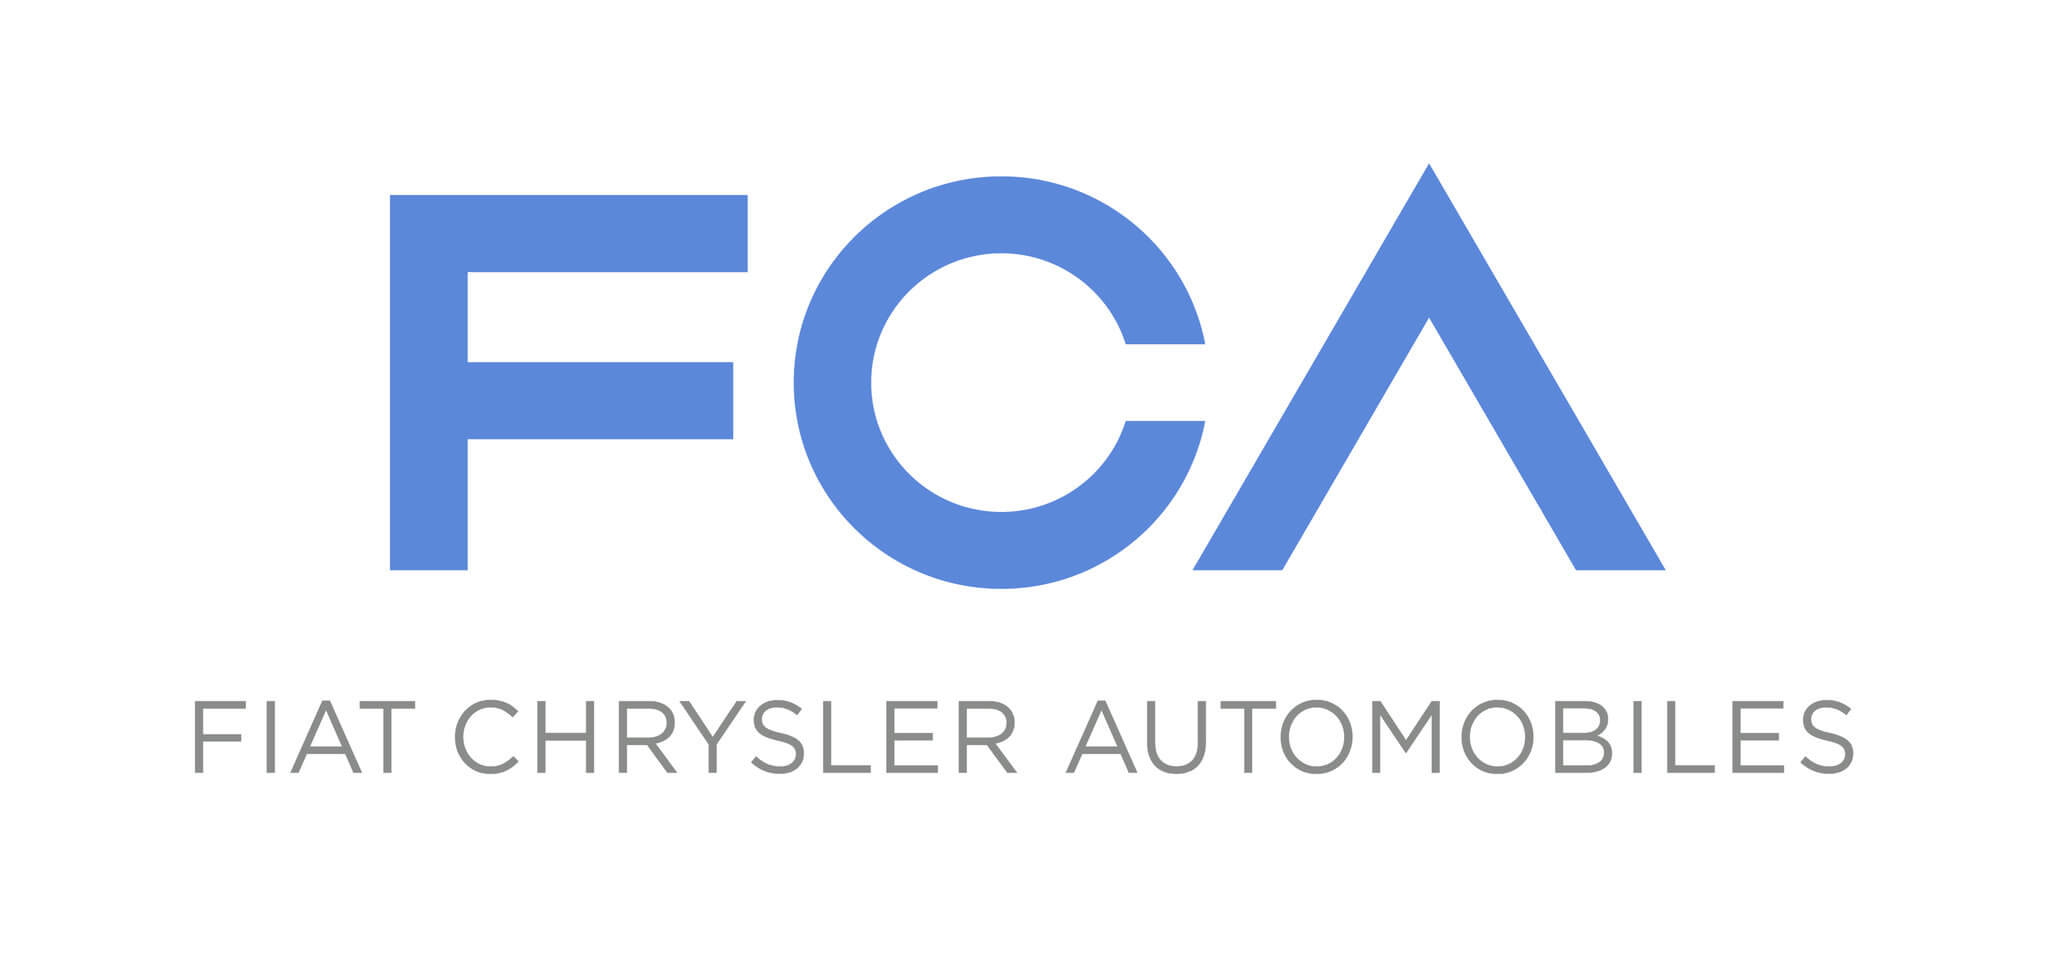 what is fiat chrysler automobiles